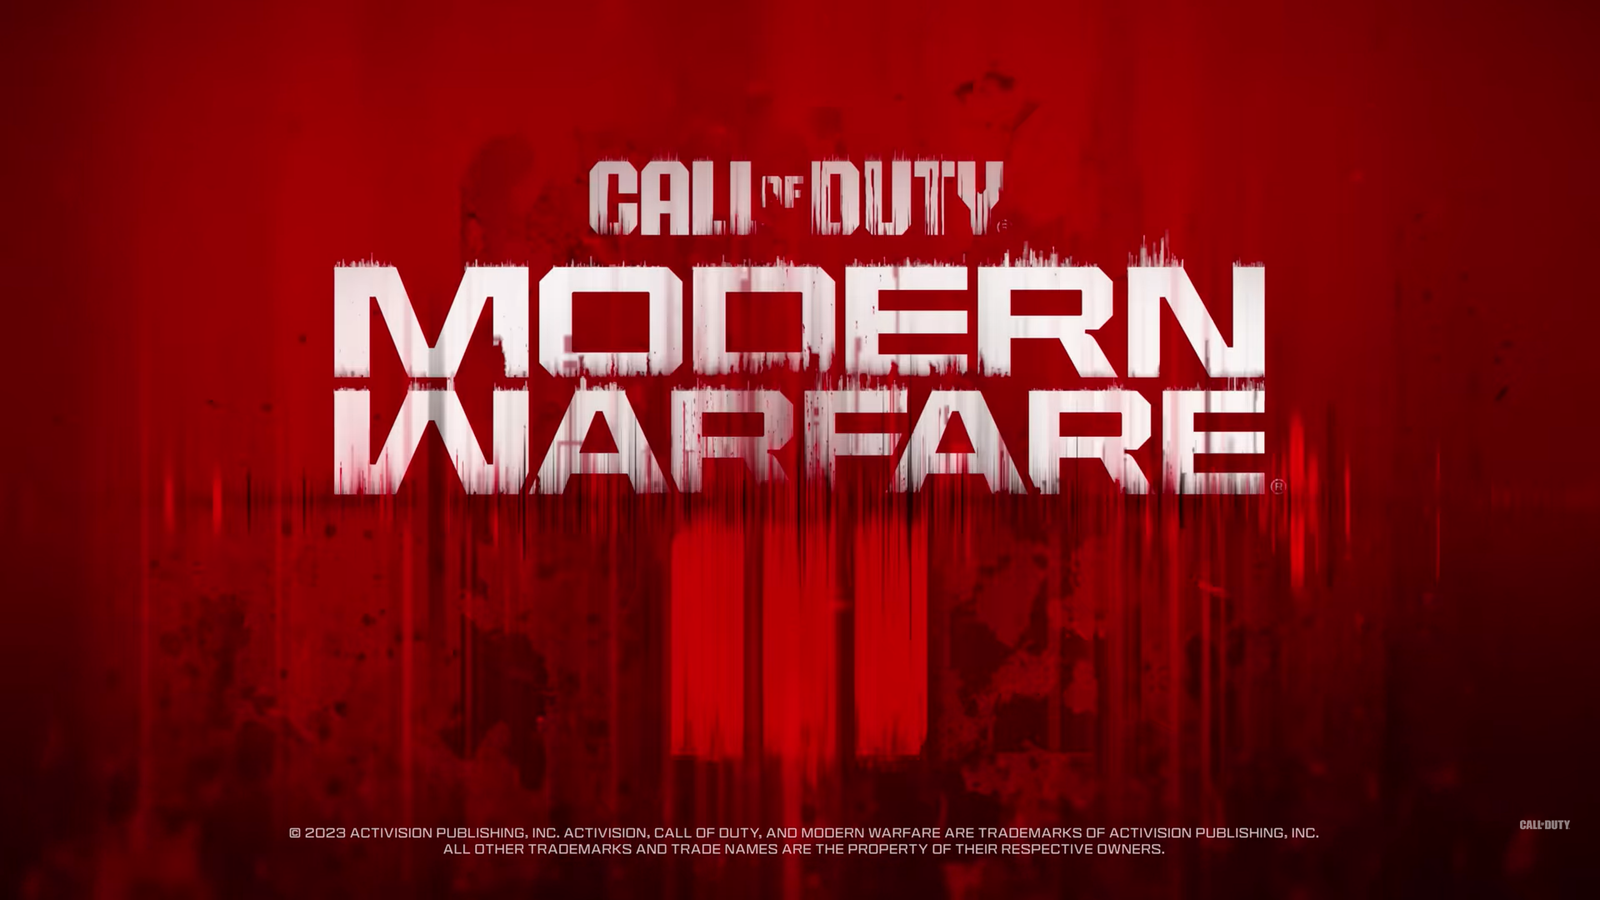 Call of Duty Modern Warfare 2 release date, trailers, and more